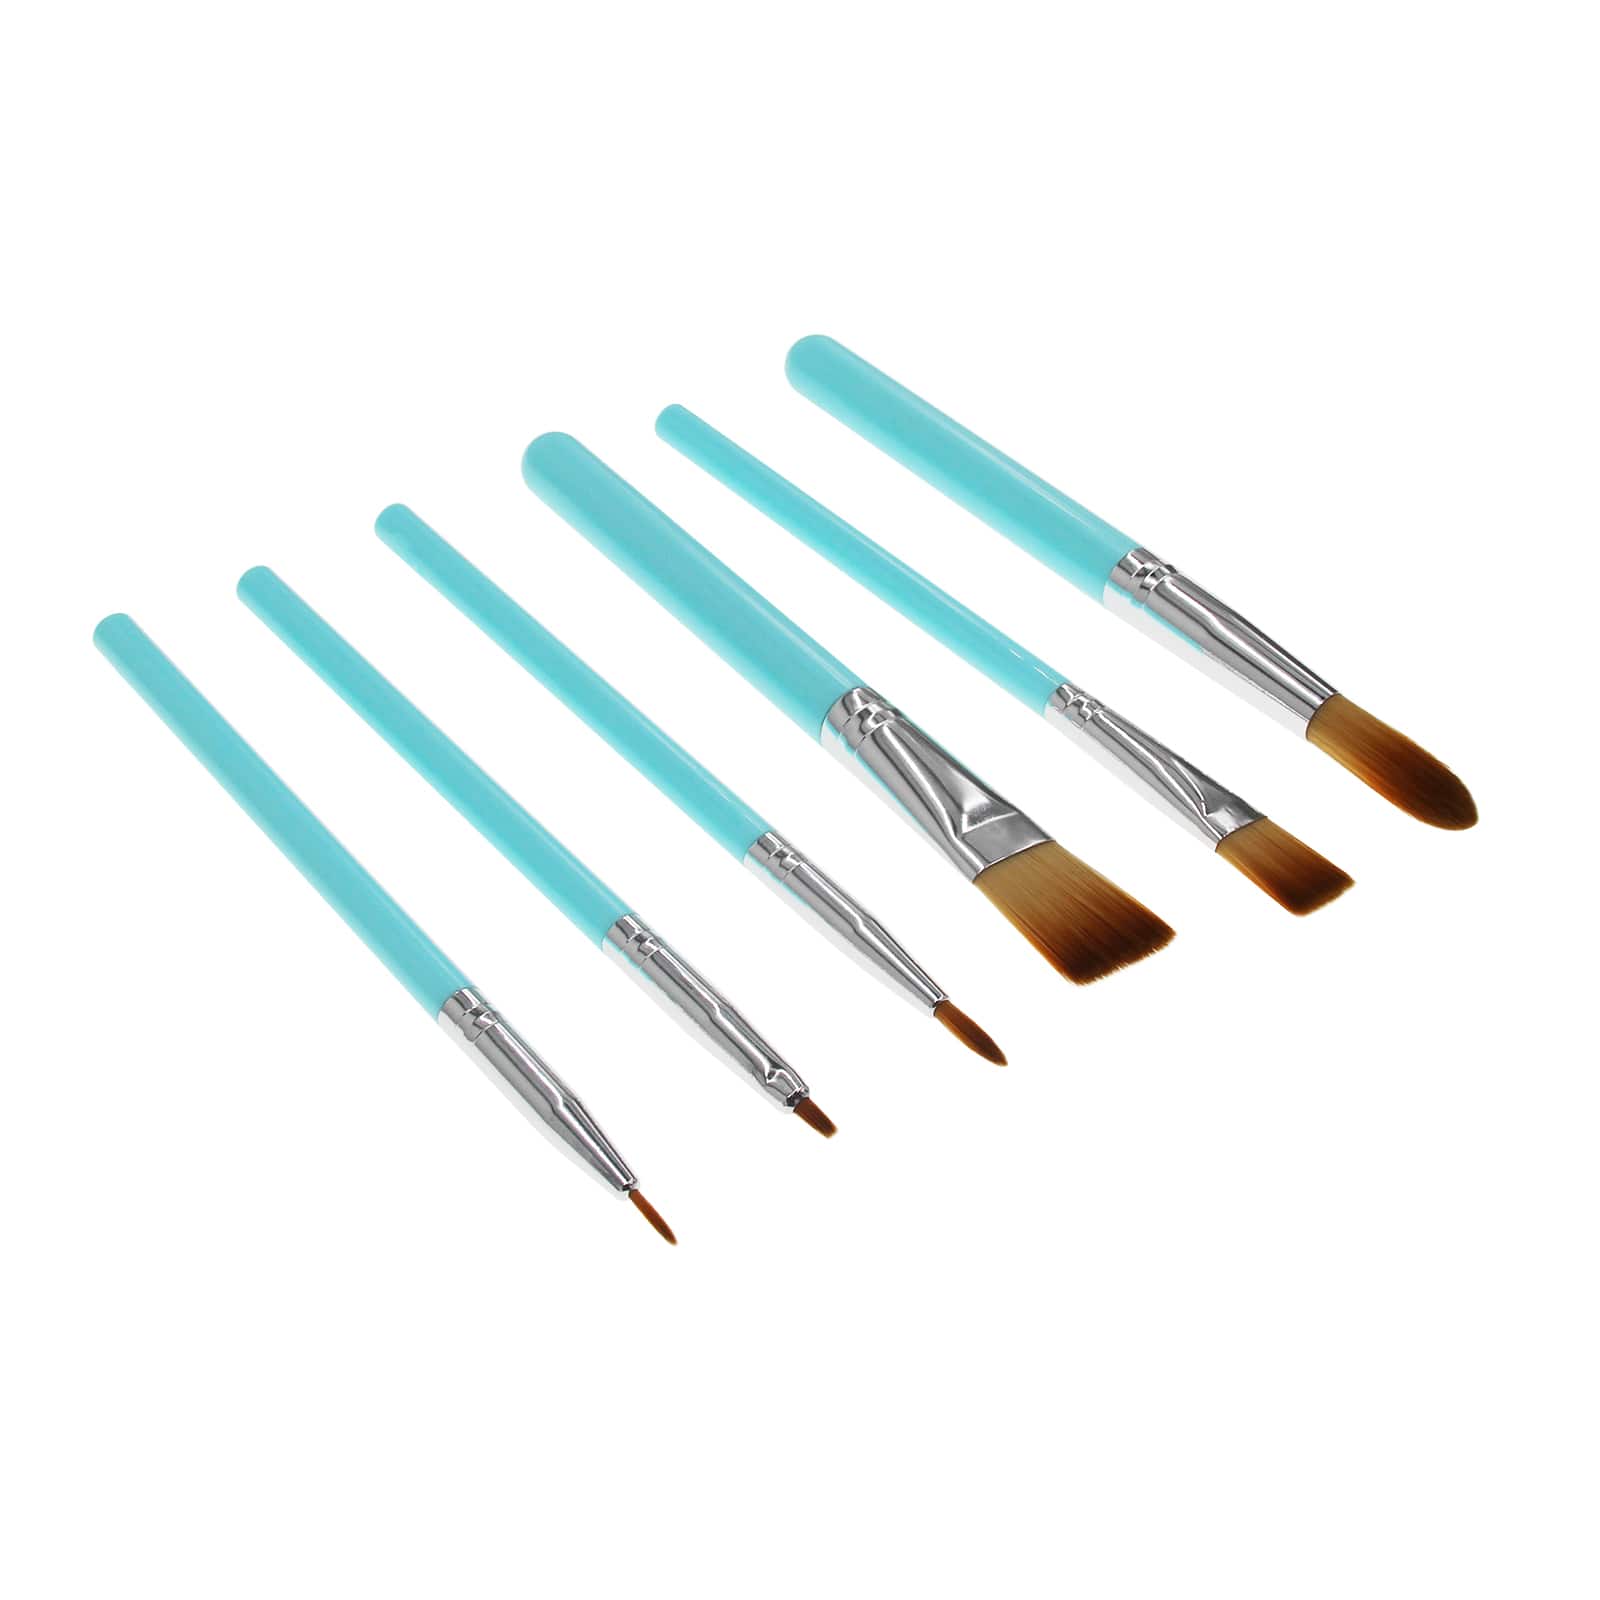  Cake Painting Brushes Set From E-Kongton, Food Safe Paint  Brushes Fondant Sugar DIY Tools Set, Soft Synthetic Brush Material, Easy To  Use & Easy To Clean, 6PCS Cake Brushes For